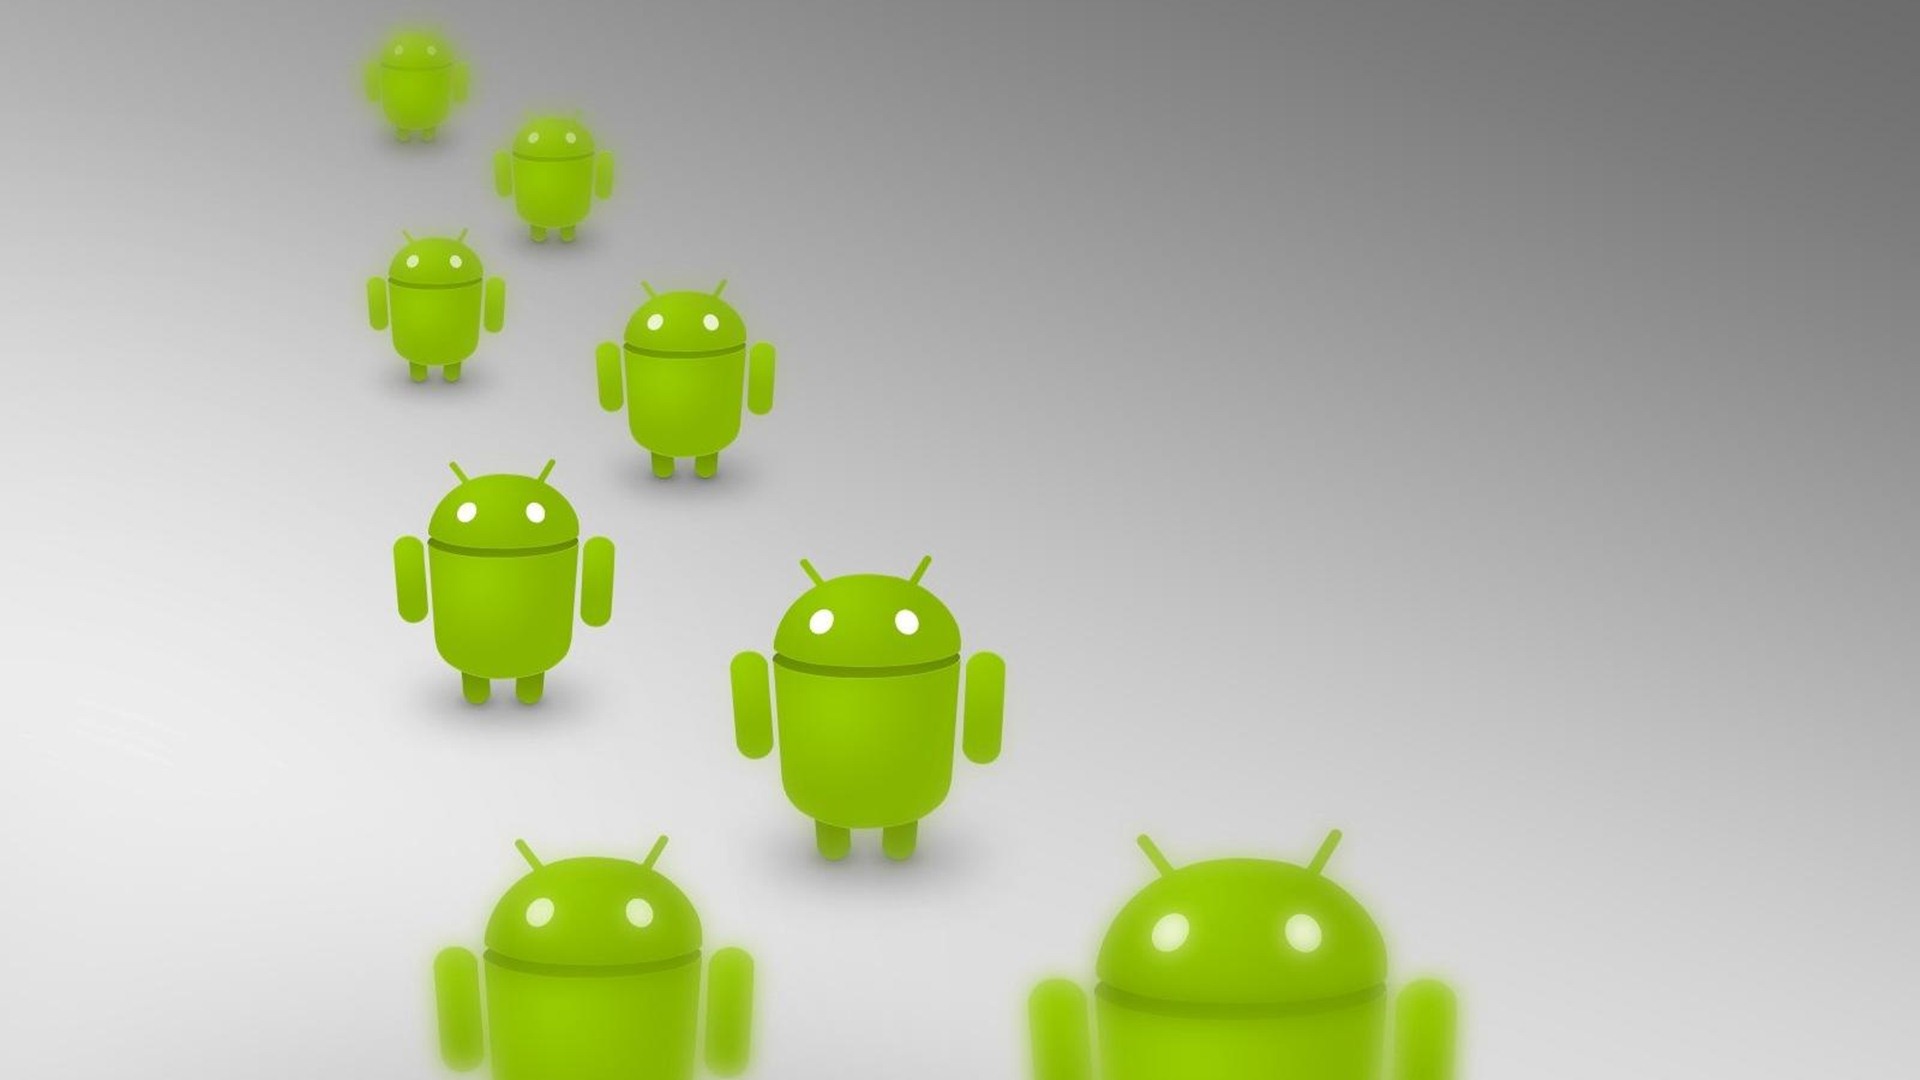 Android Robot Army Desktop Wallpaper - Android Honeycomb - HD Wallpaper 